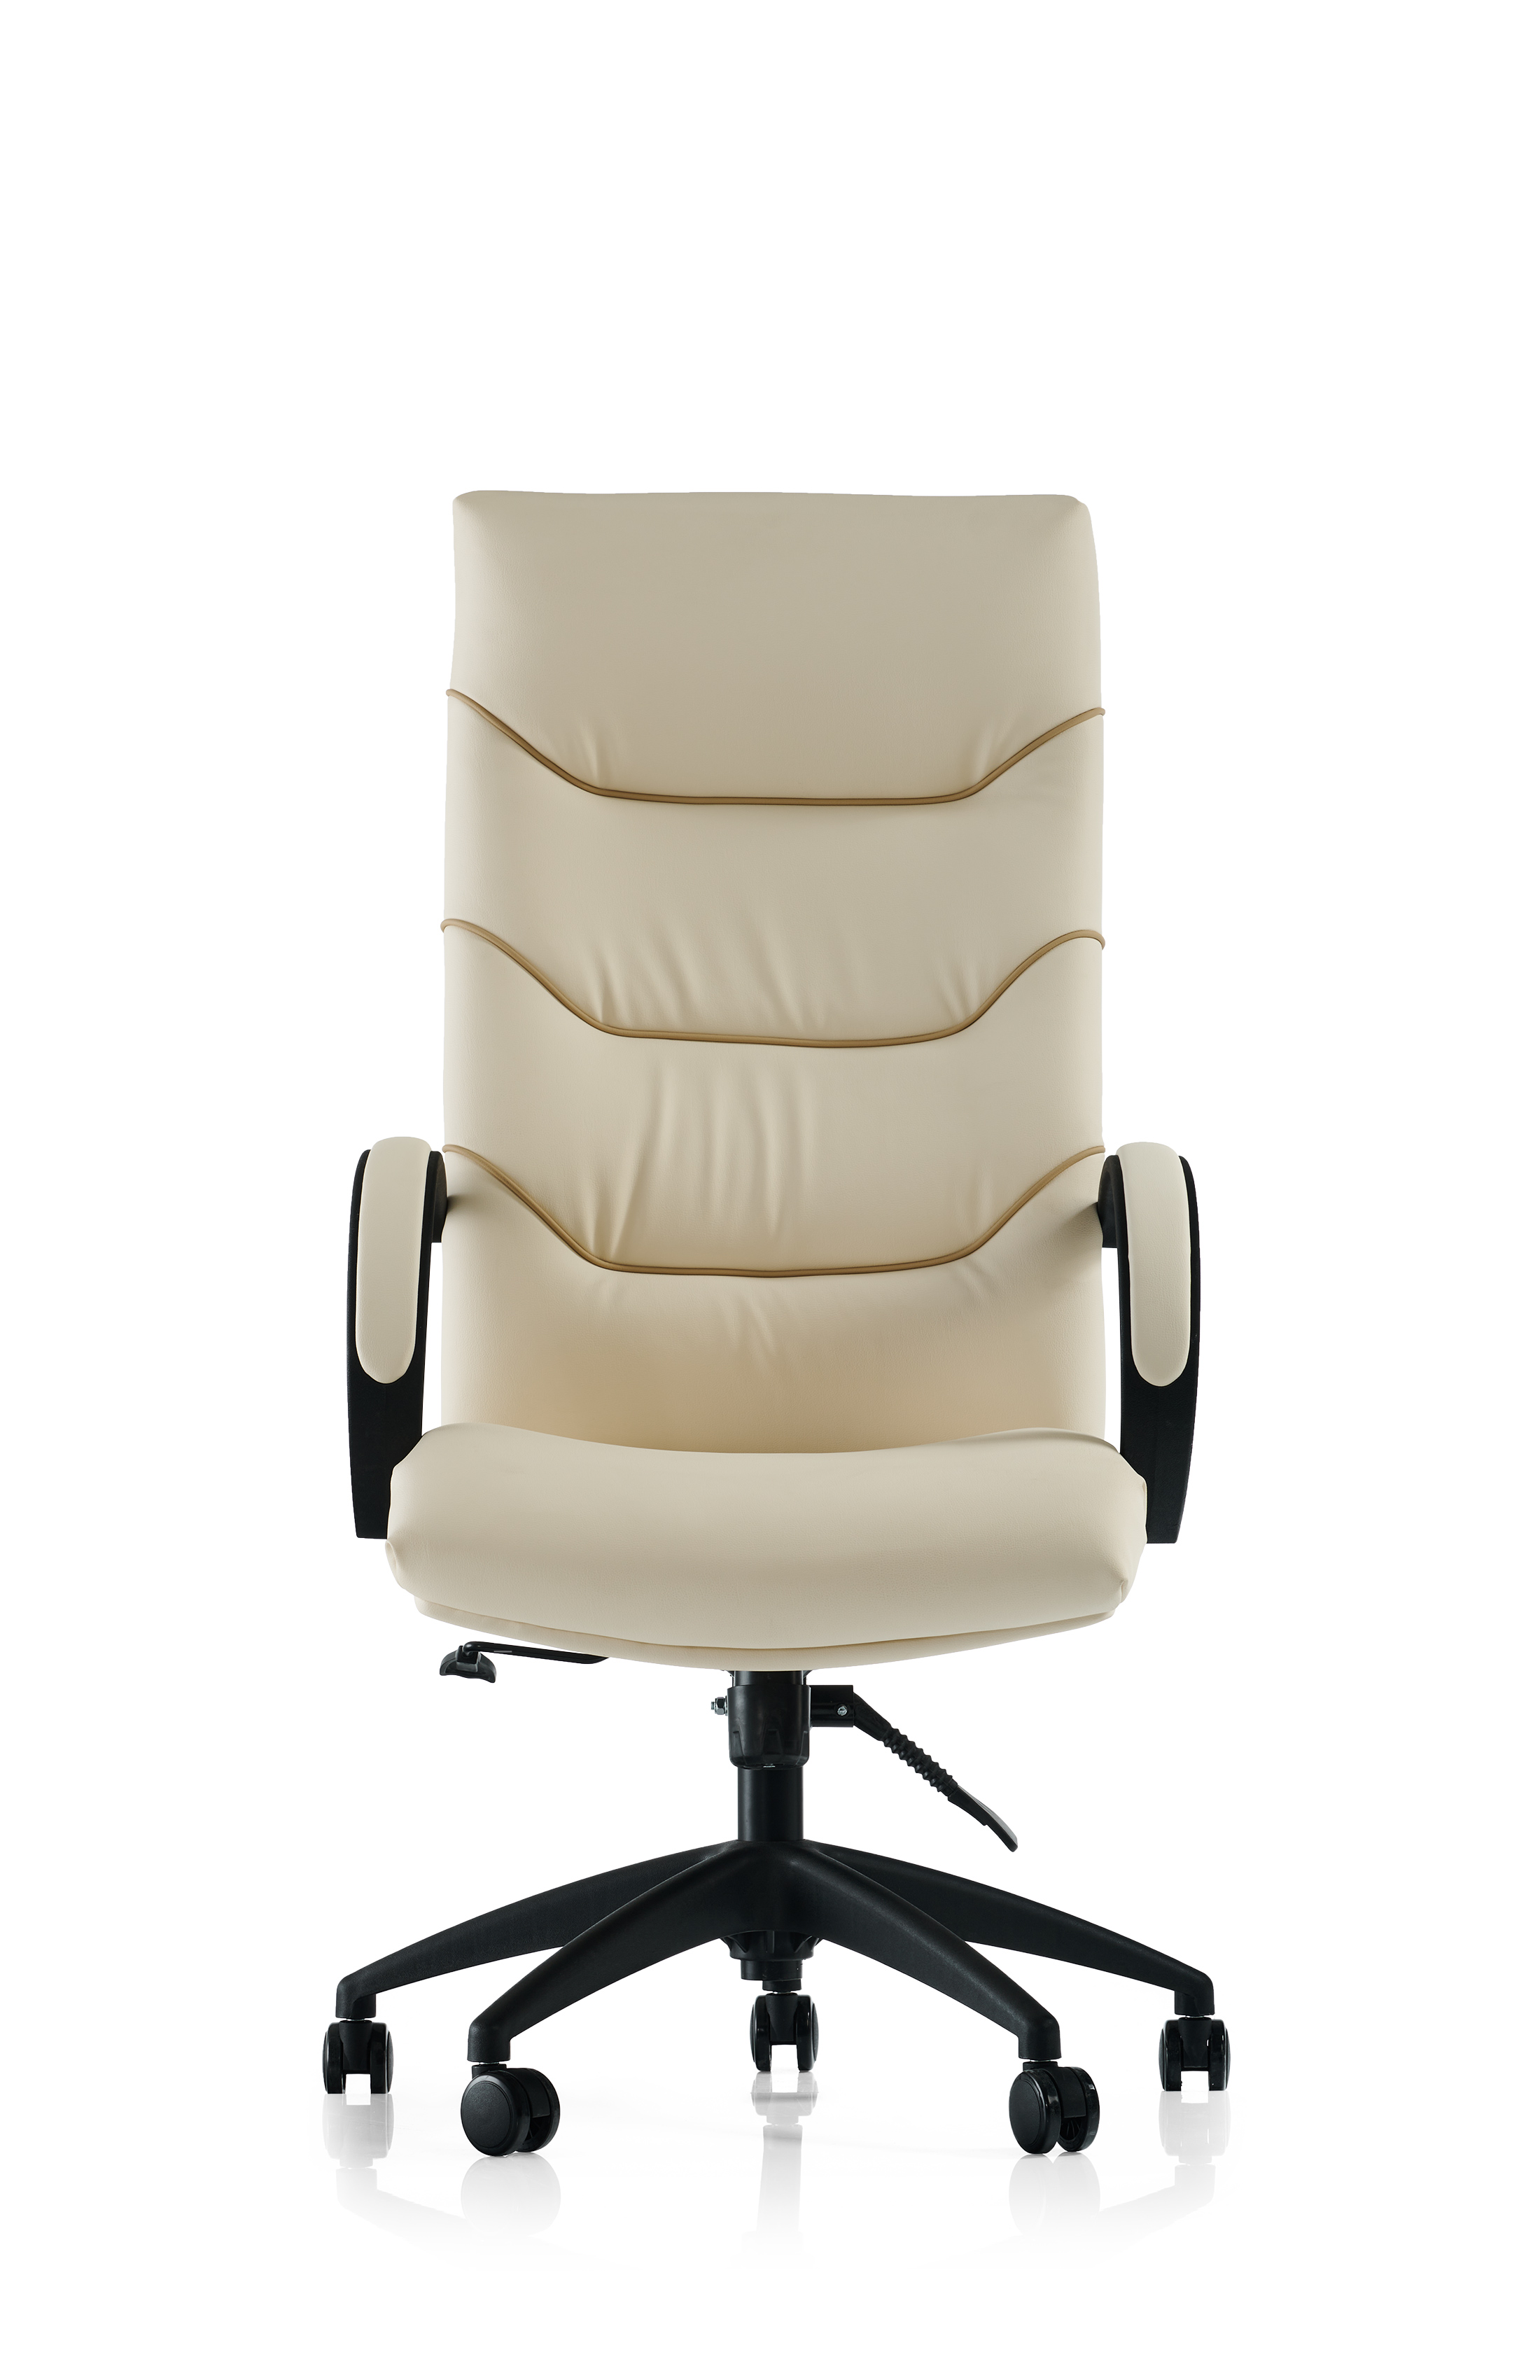 PIEDRA 000P MANAGER CHAIR